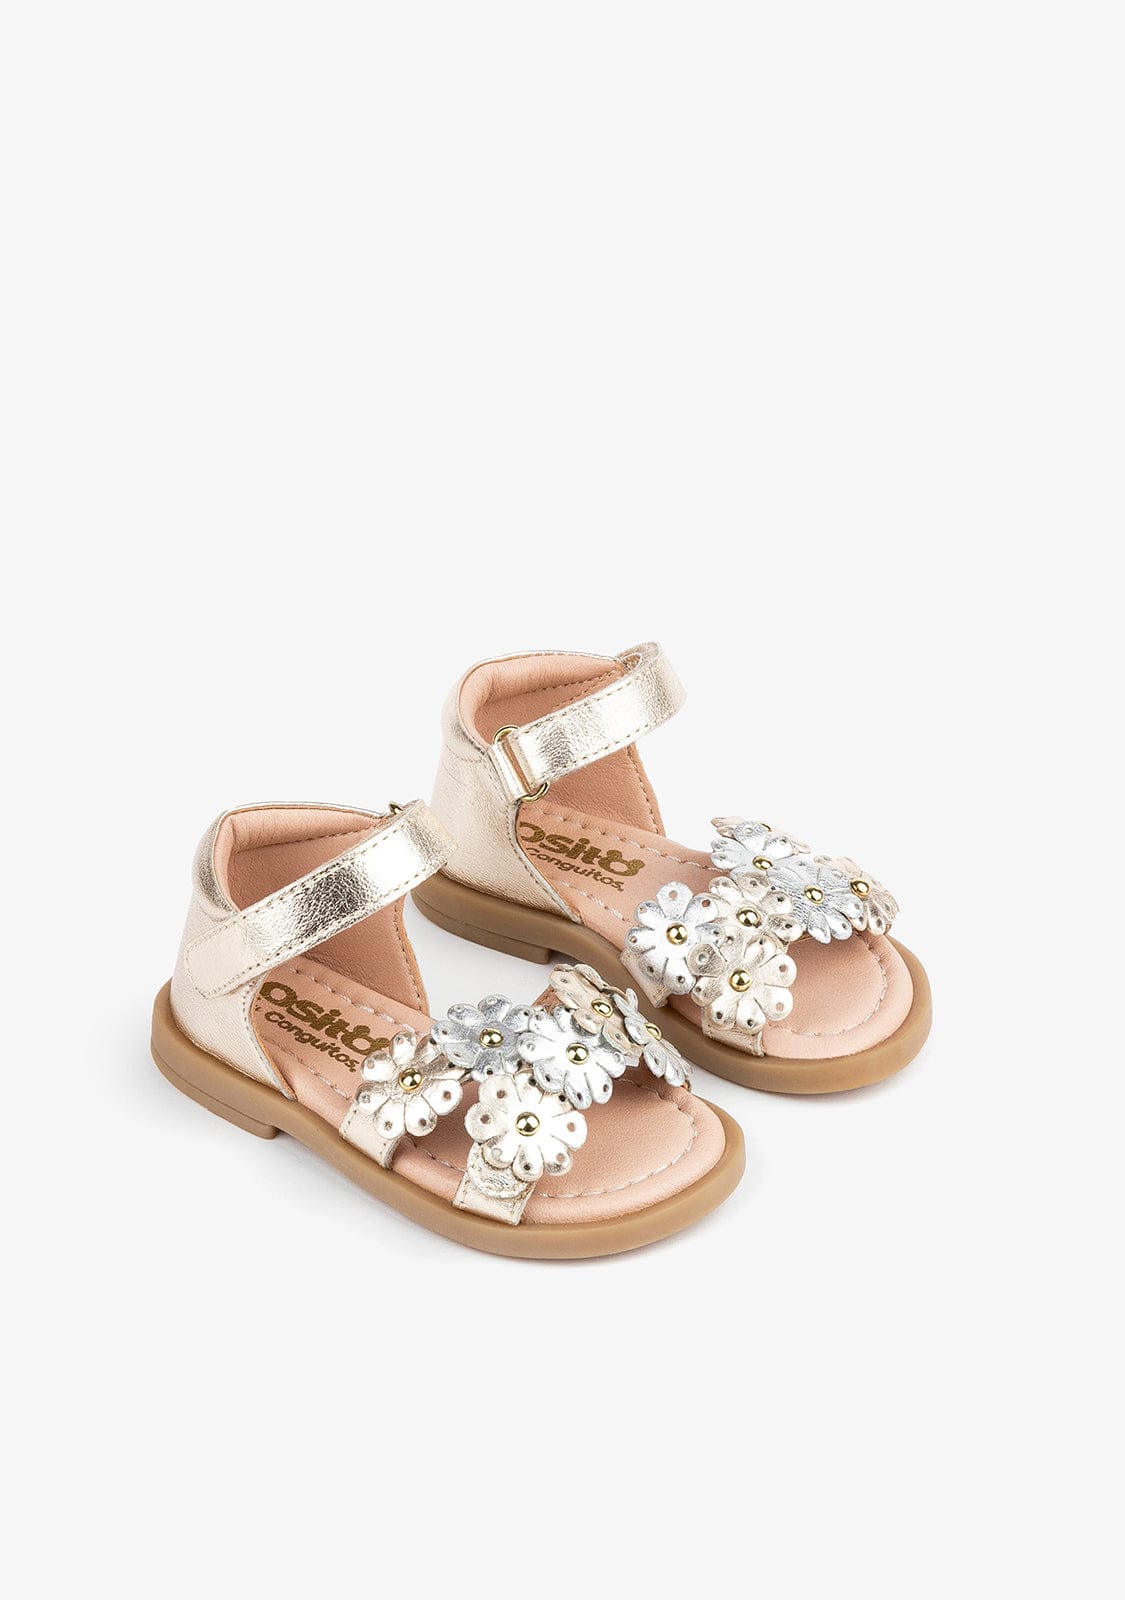 OSITO Shoes Baby's Platinum Daisy Leather Sandals